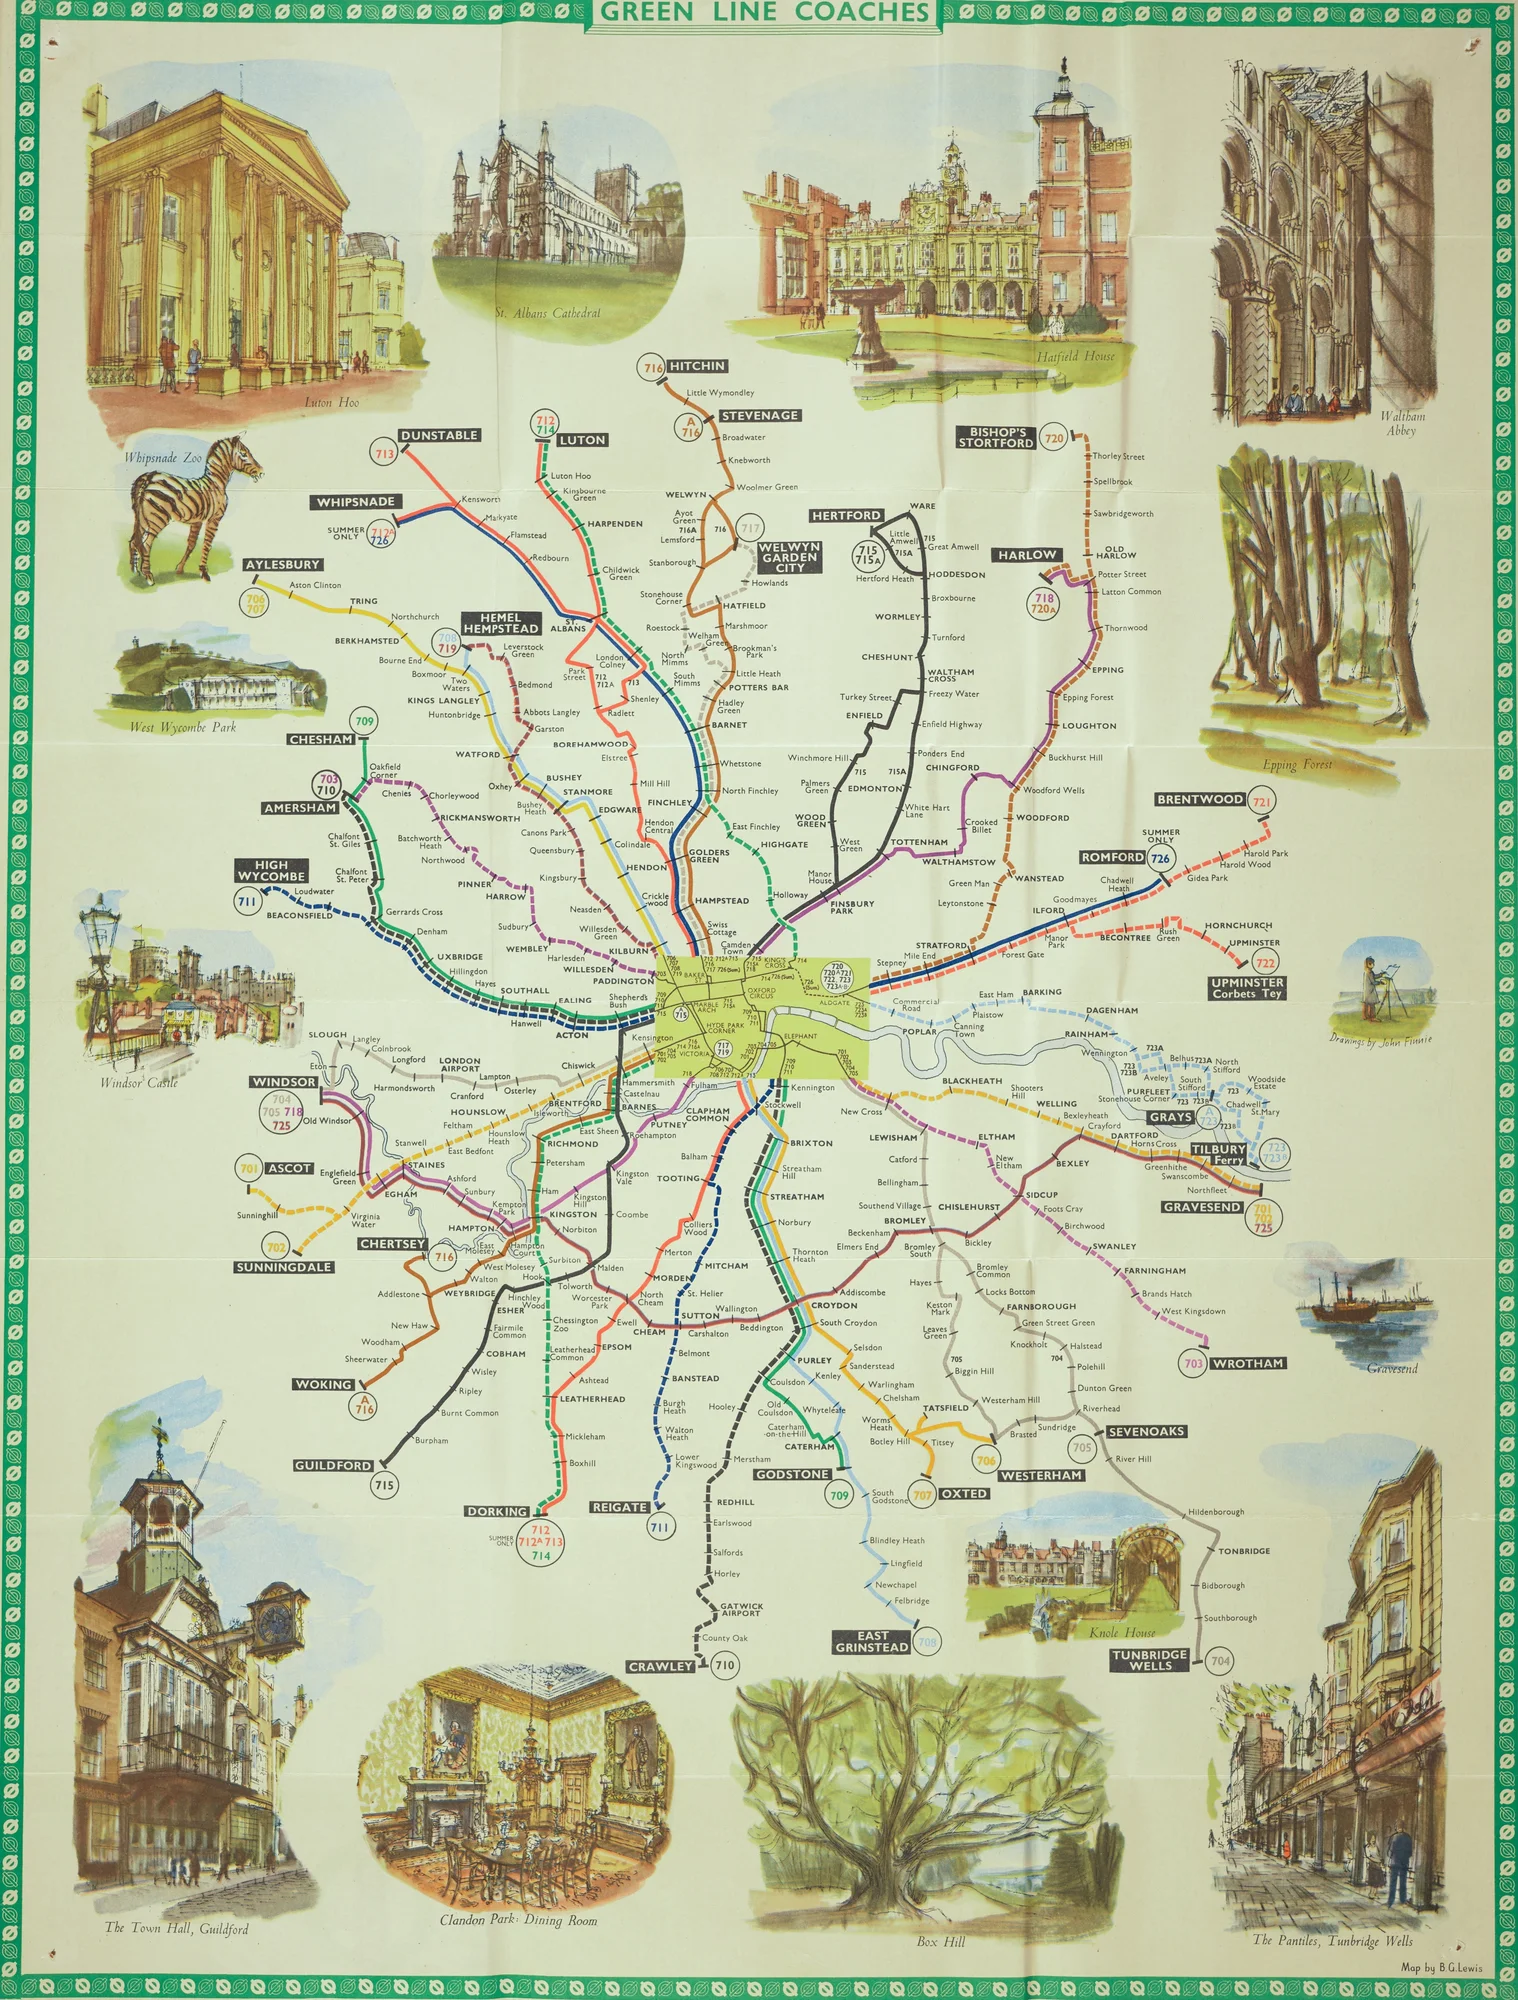 Green Coaches Route Map